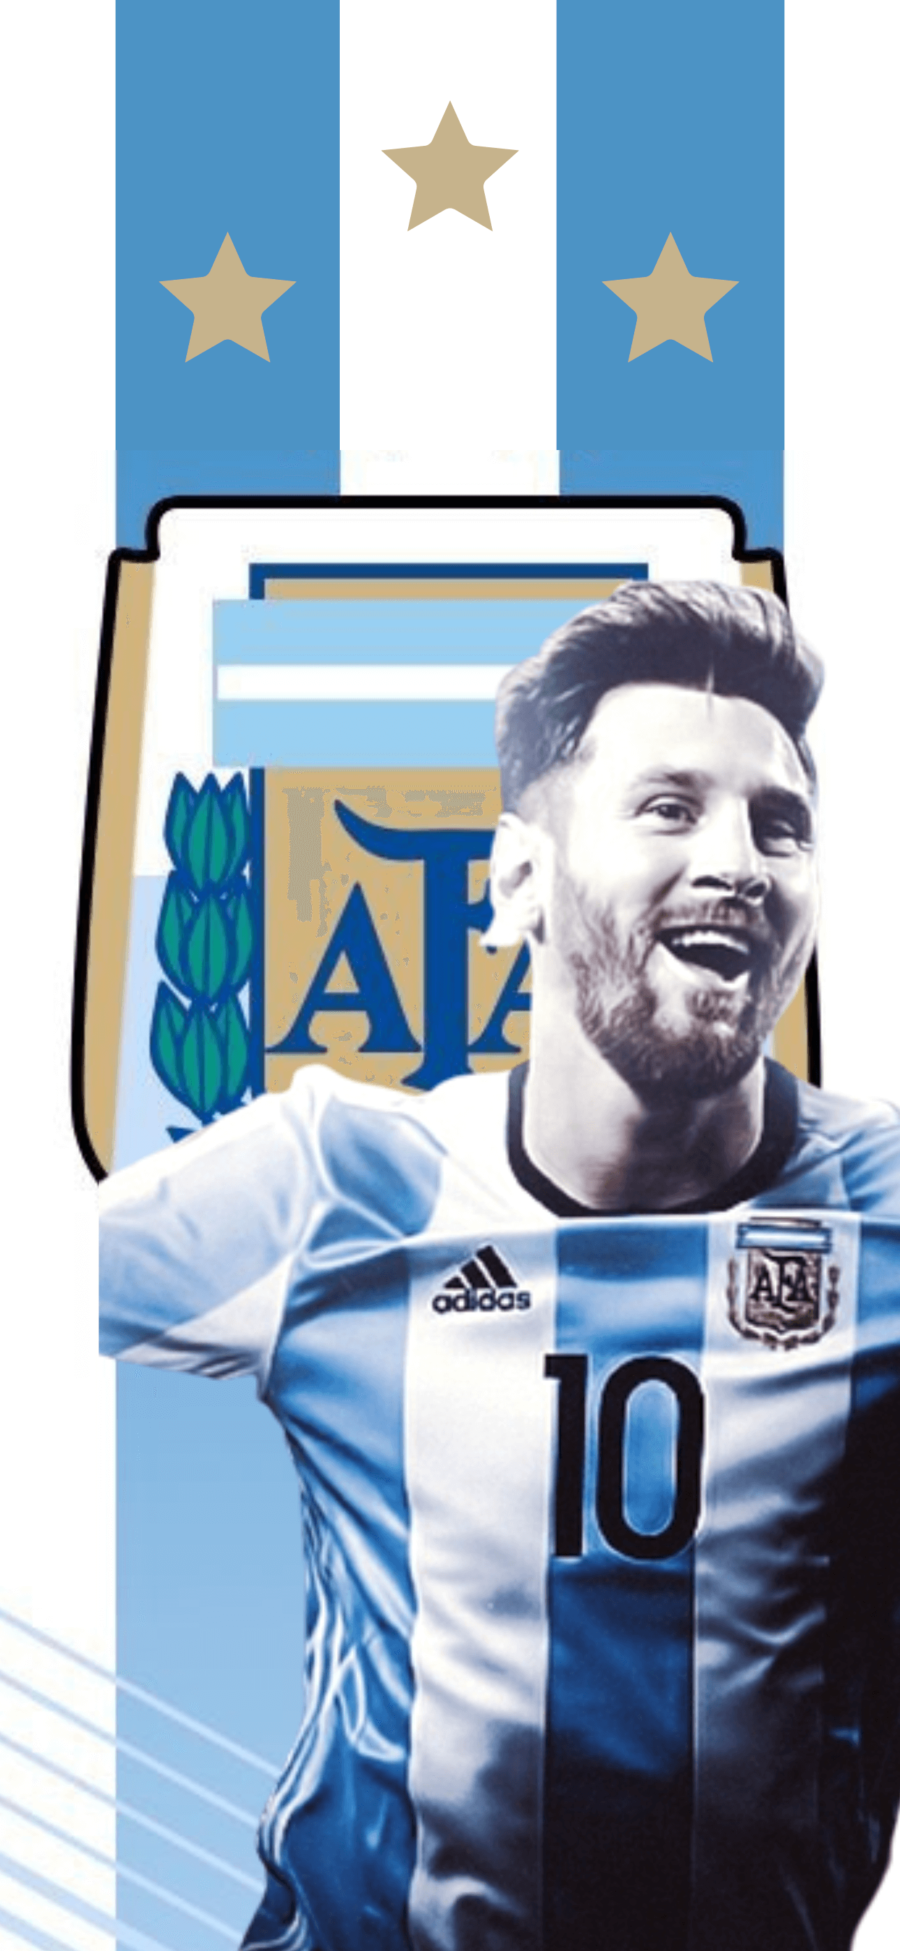 Messi 2022 Wallpapers  Top New  Latest Messi 2022 Backgrounds Download